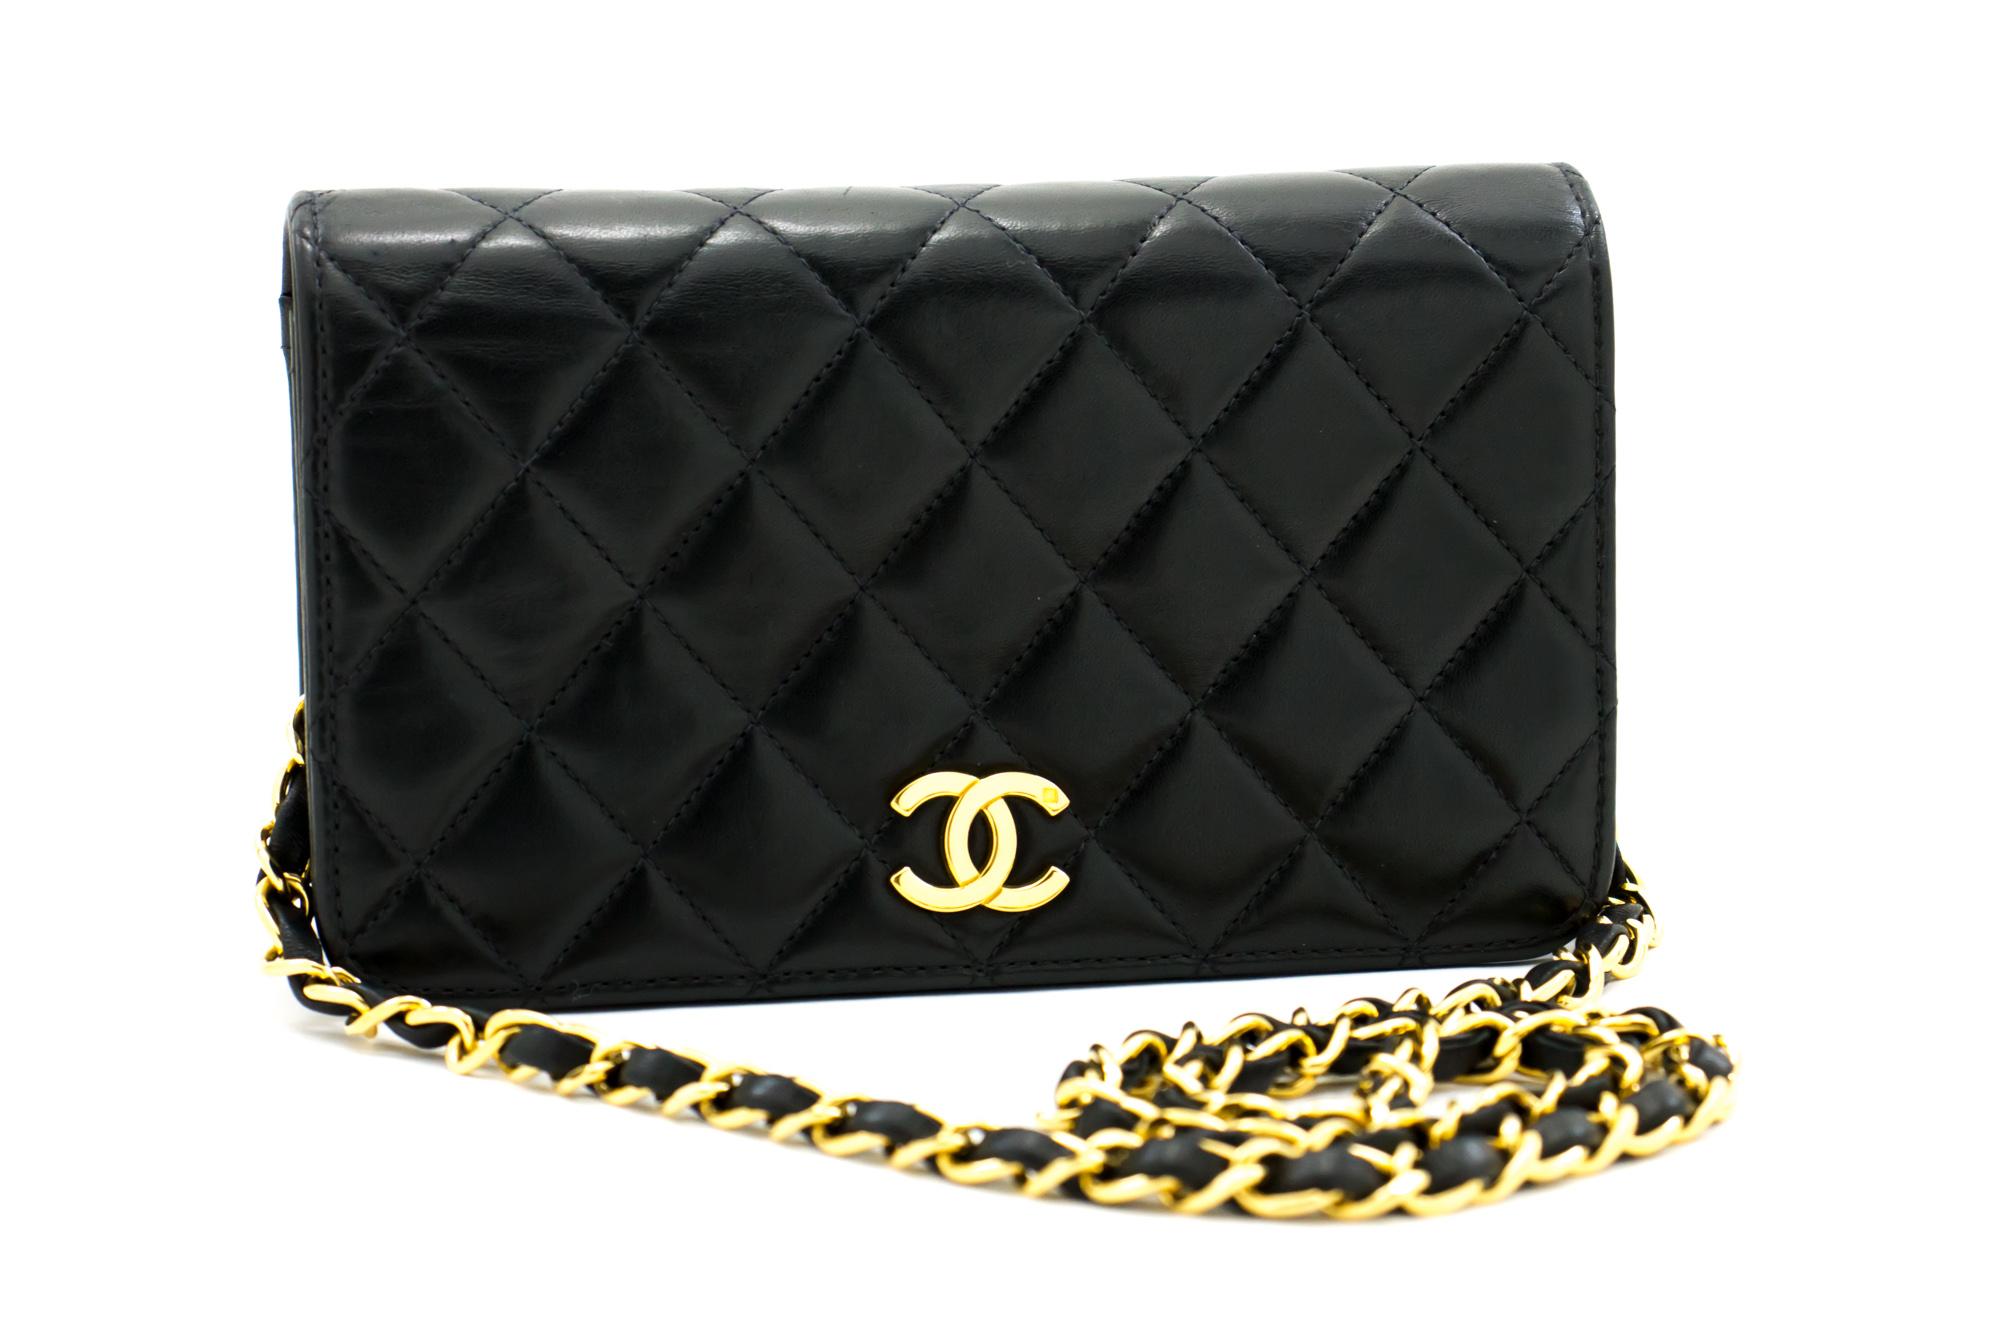 An authentic CHANEL Full Flap Small Chain Shoulder Bag Clutch Black Quilted. The color is Black. The outside material is Leather. The pattern is Solid. This item is Vintage / Classic. The year of manufacture would be 1997-1999.
Conditions &